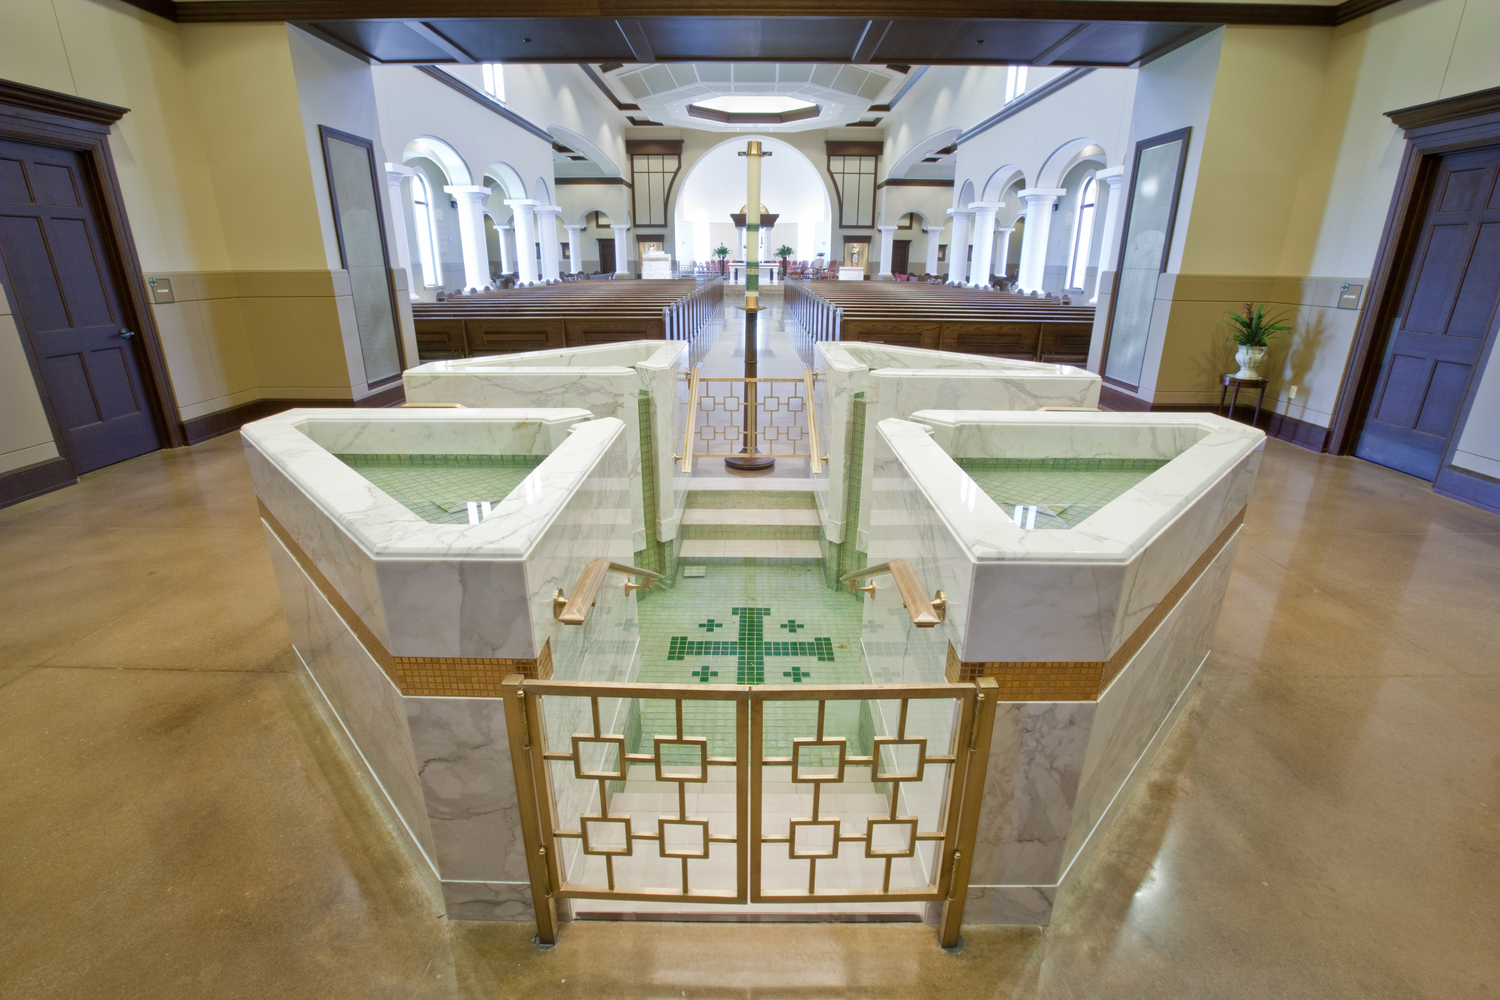 Octagonal Baptismal Font with Four Triangular Upper Bowls with Spillways and Descending and Ascending Steps into a Cruciform Lower Pool, St. Eugene, Oklahoma City, OK.